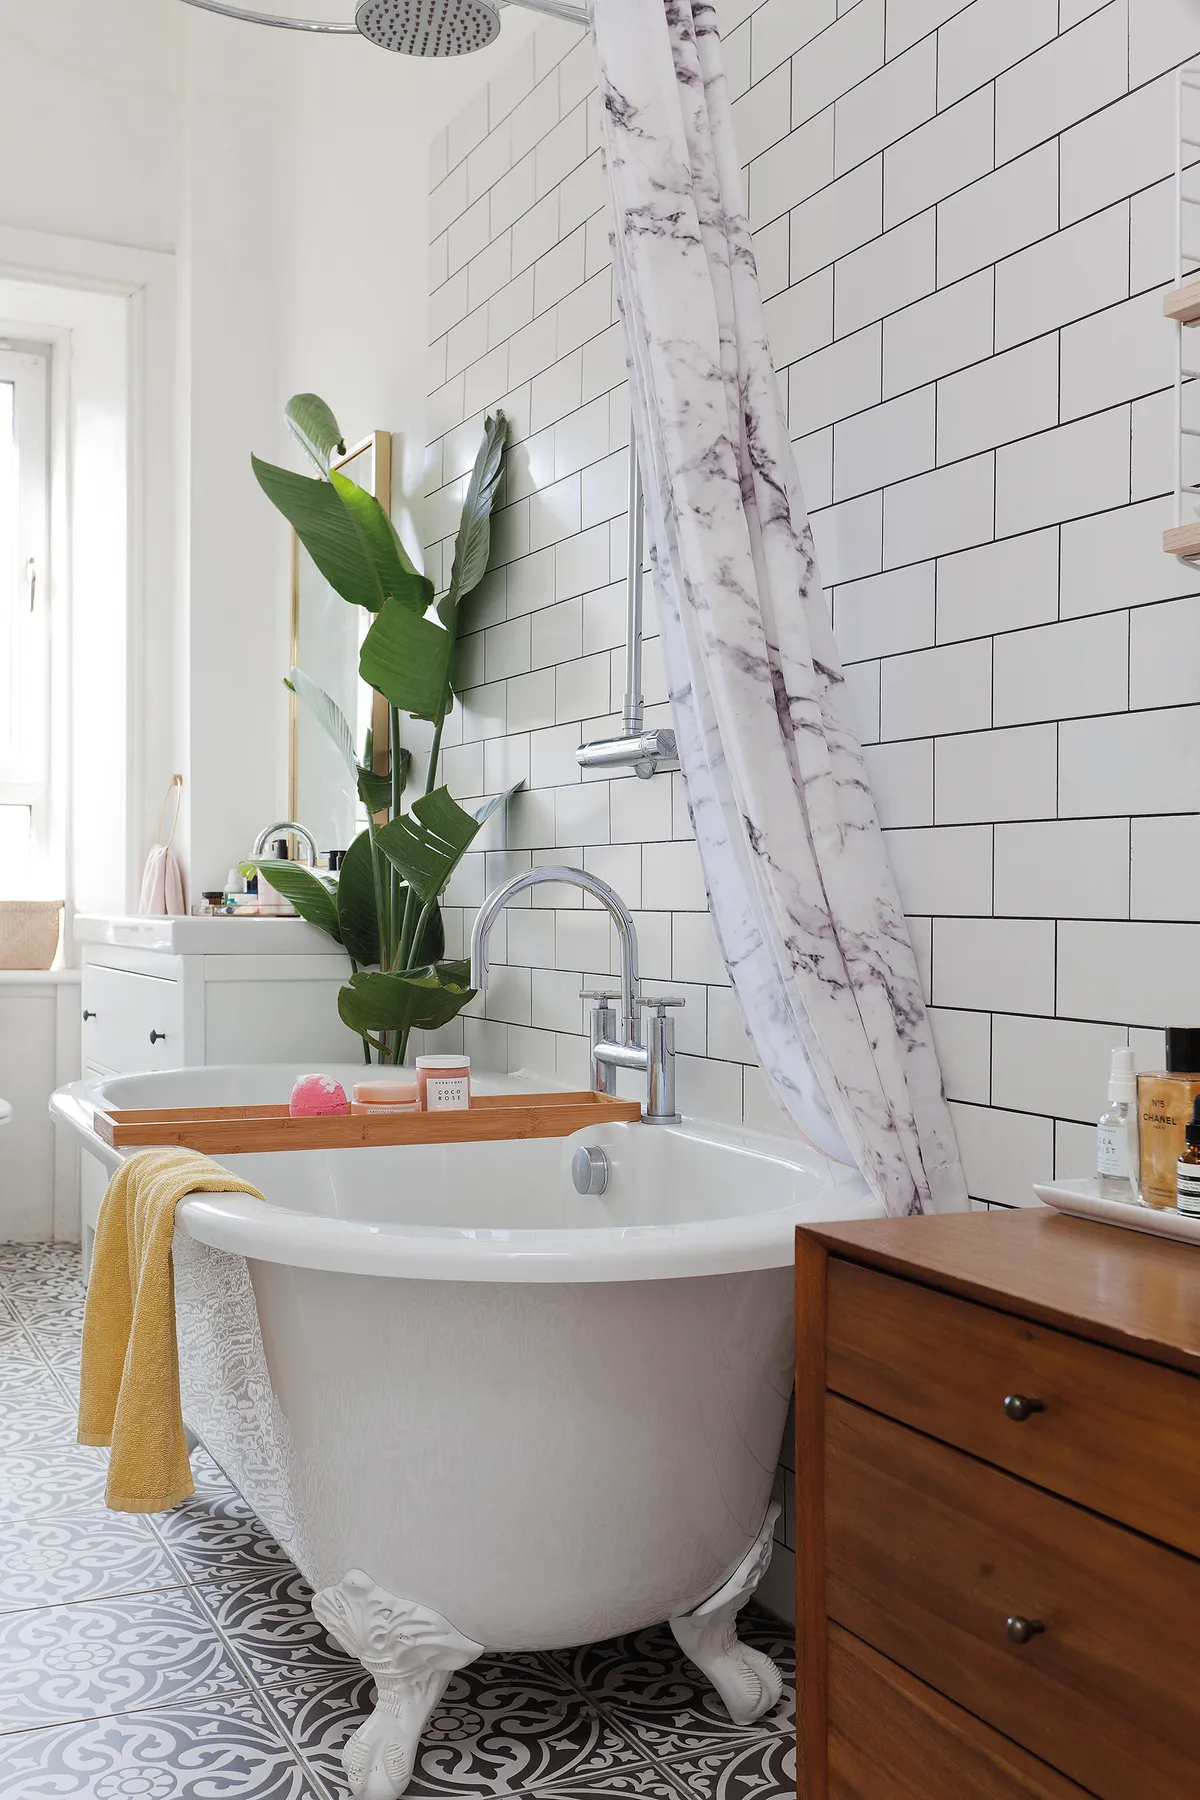 Plenty of plants and fresh white tiles create a serene look in the bathroom. Wanting to steer away from built-in furniture, Kate has used baskets for storage, as well as a vintage-look dresser and chest of drawers